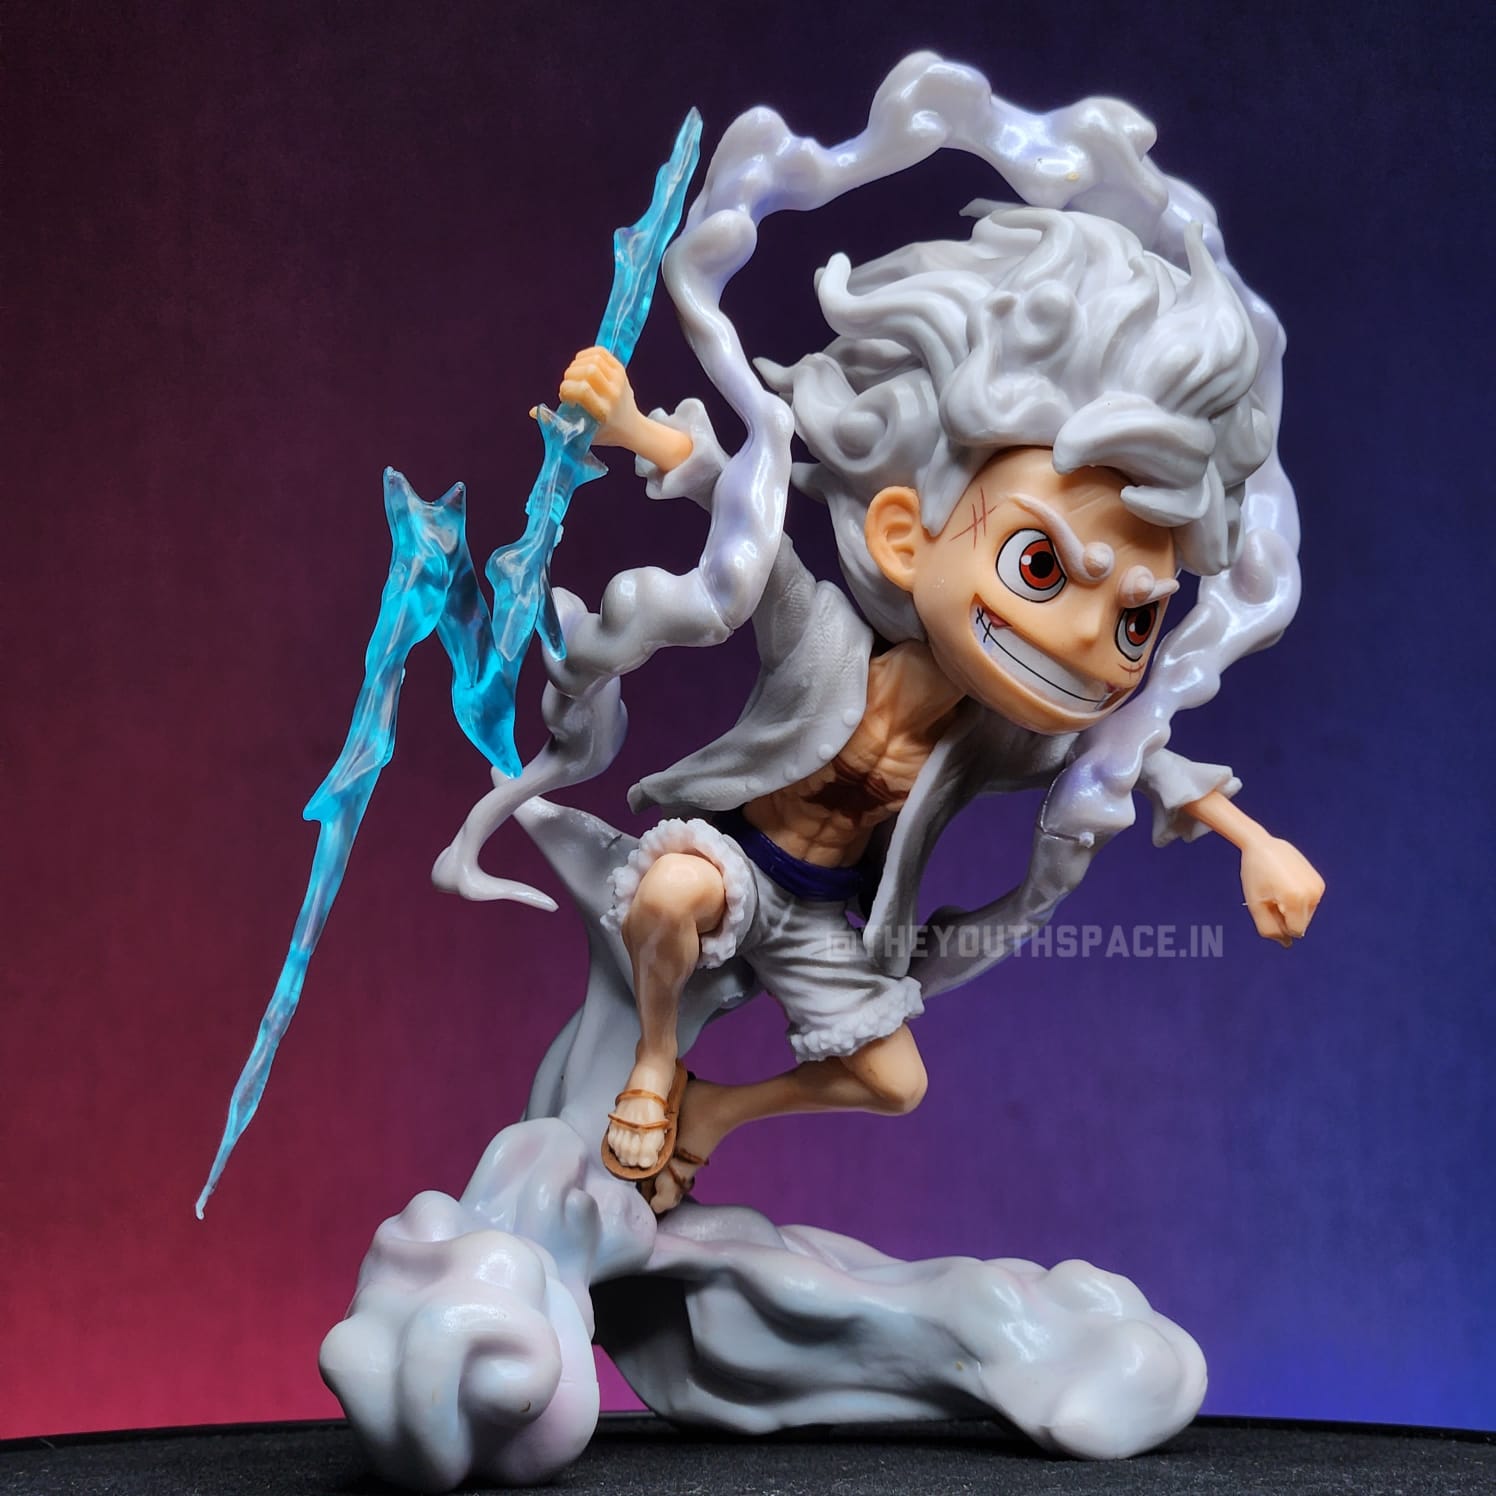 LUFFY GEAR 5 ACTION FIGURE - ONE PIECE